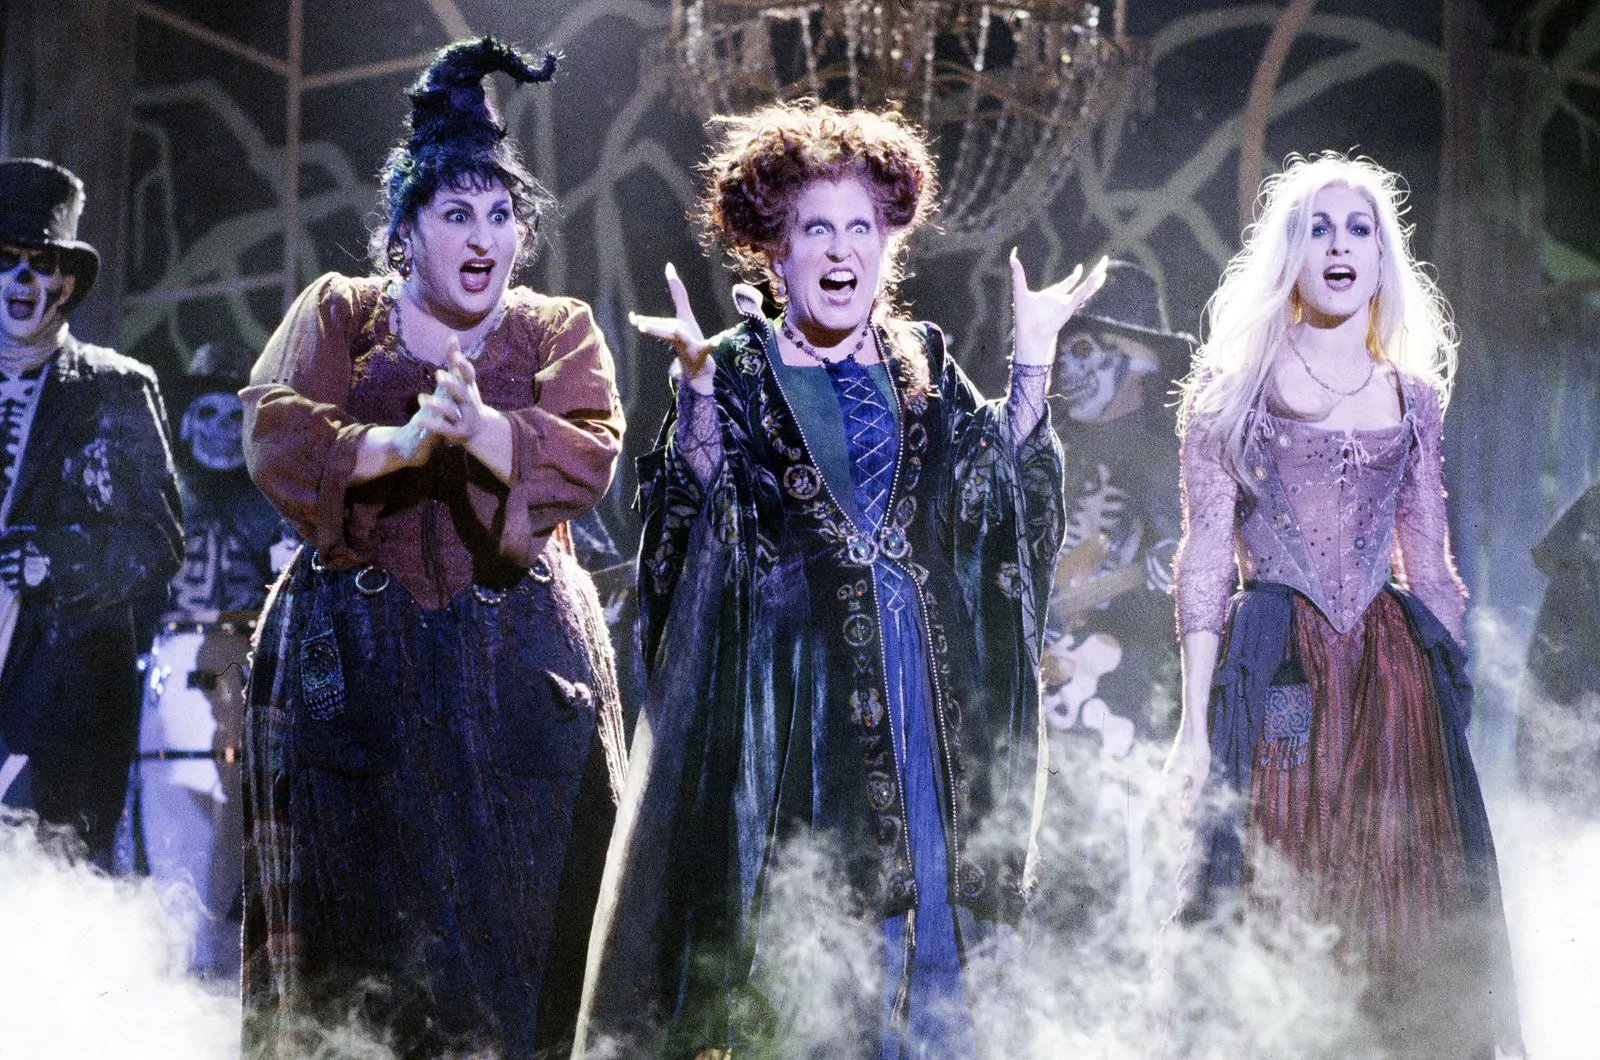 Kathy Najimy, Bette Midler and Sarah Jessica Parker in the film Hocus Pocus, 1993